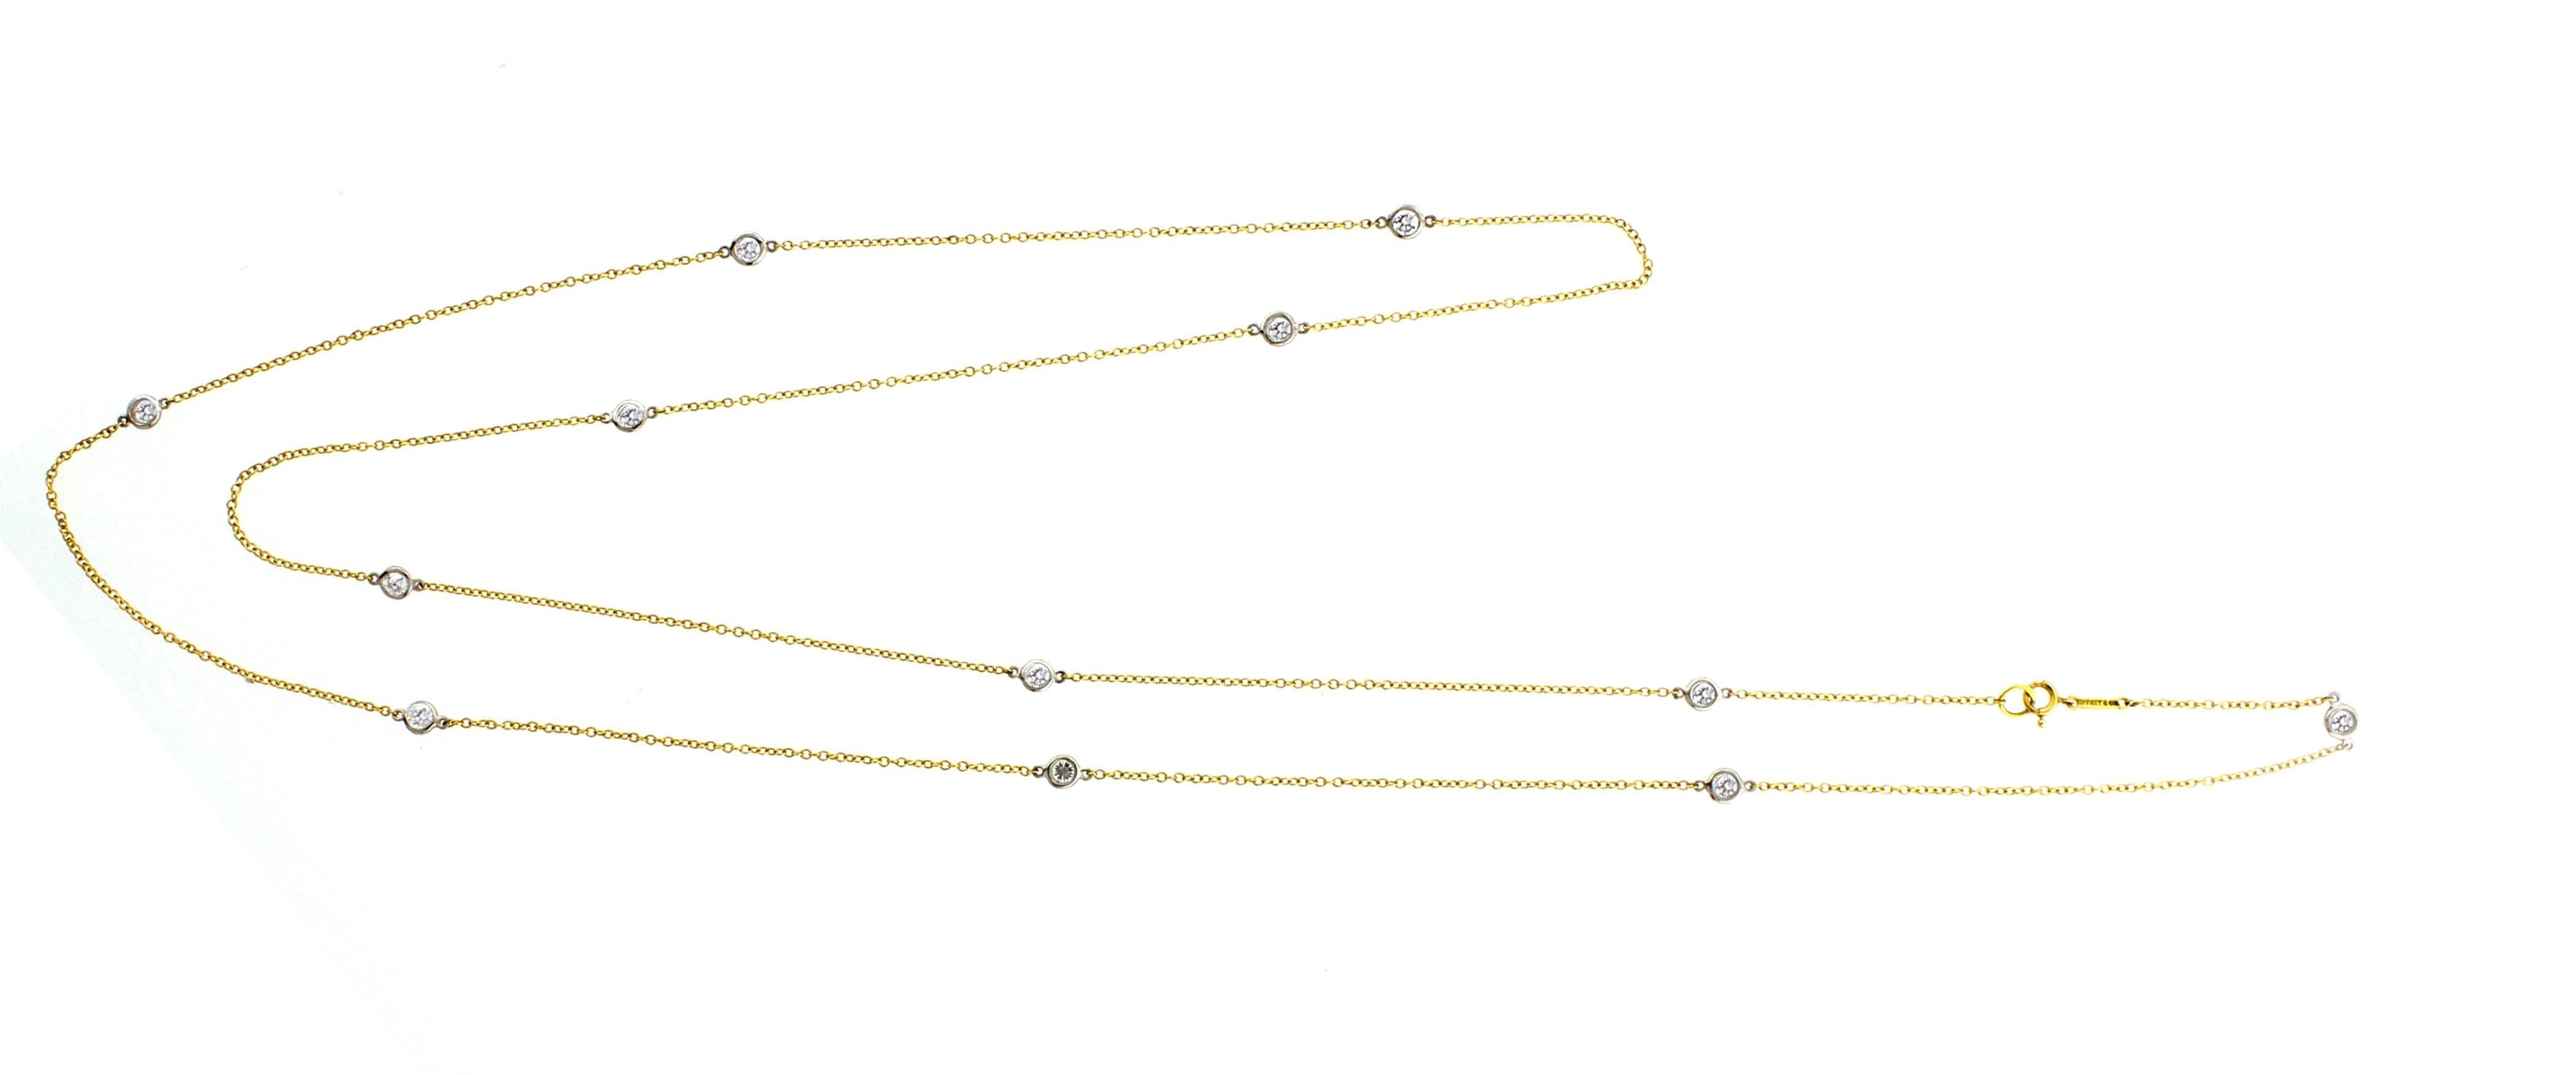 Tiffany round diamonds catch the light and make it dance. Necklace in 18k  gold with 12 round brilliant diamonds. 36